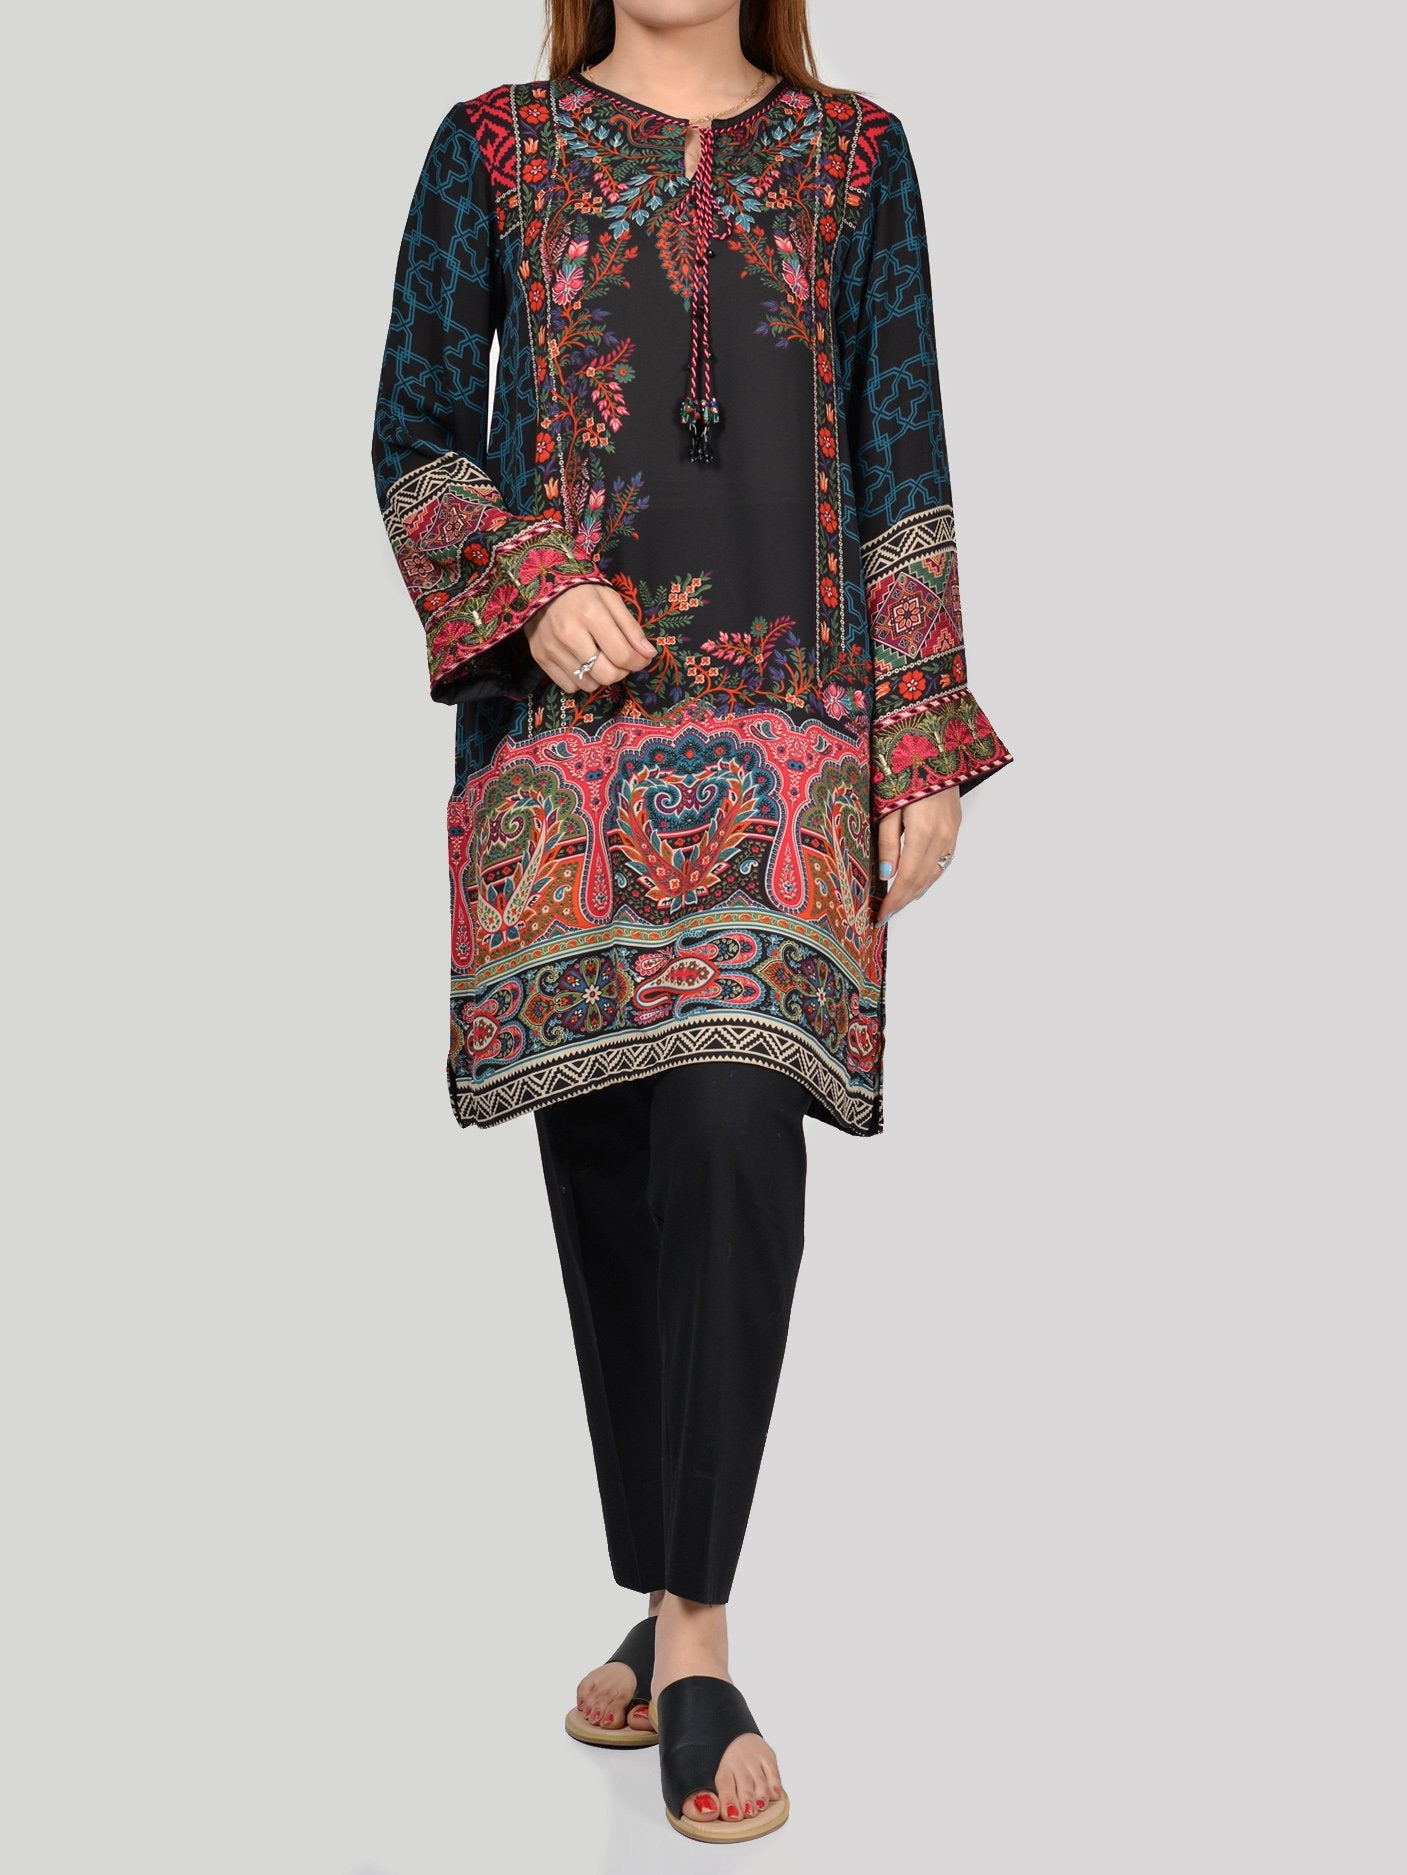 Embroidered Grip Shirt (P1005) by Limelight